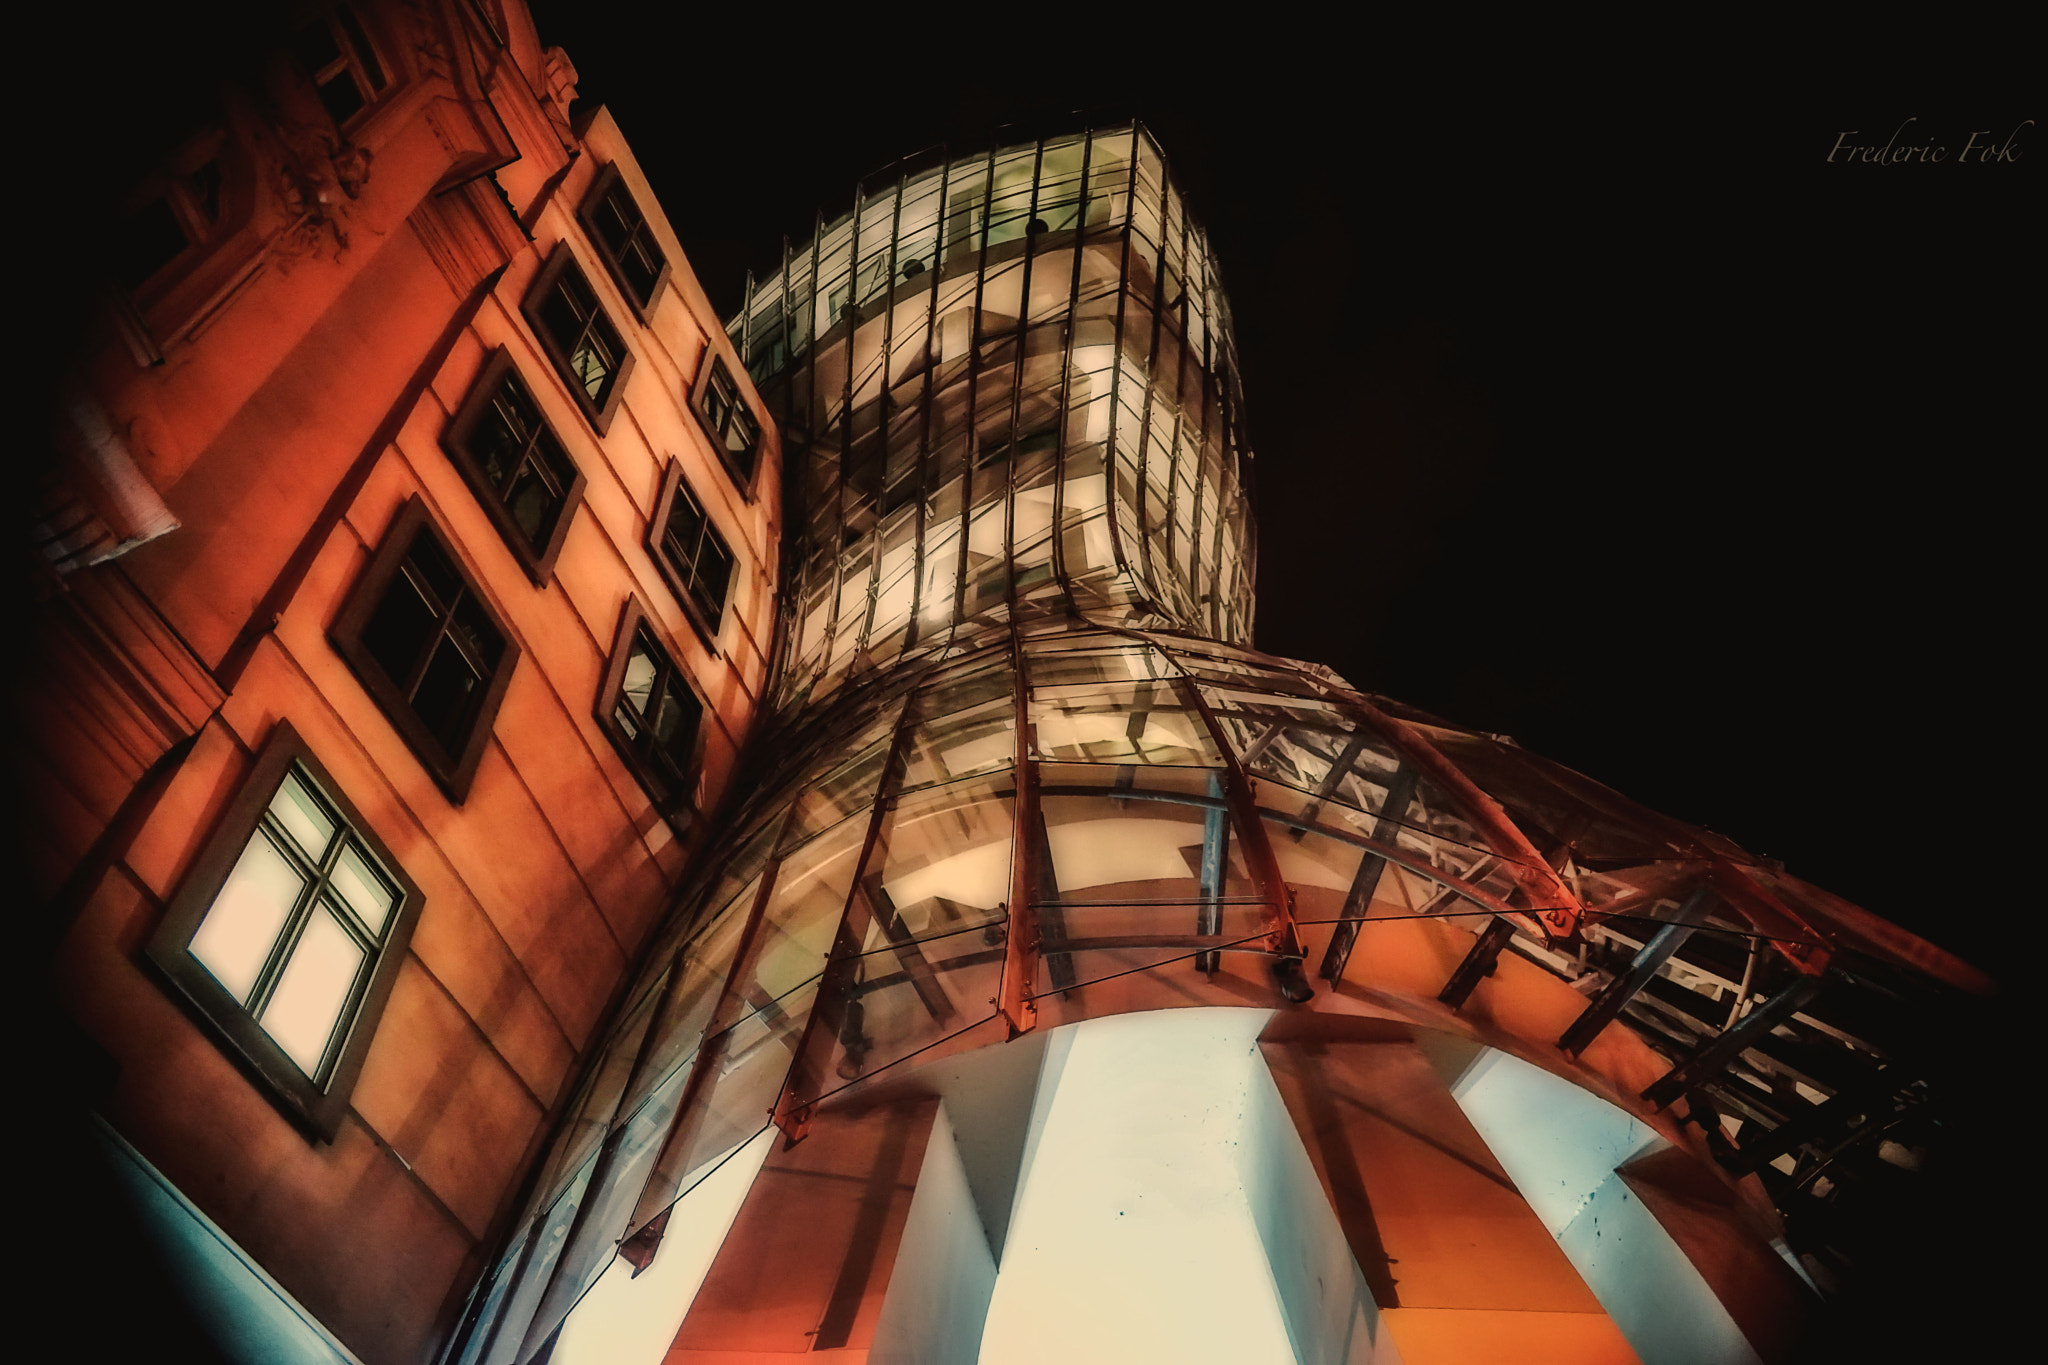 Sony a7 sample photo. The dancing house by night photography